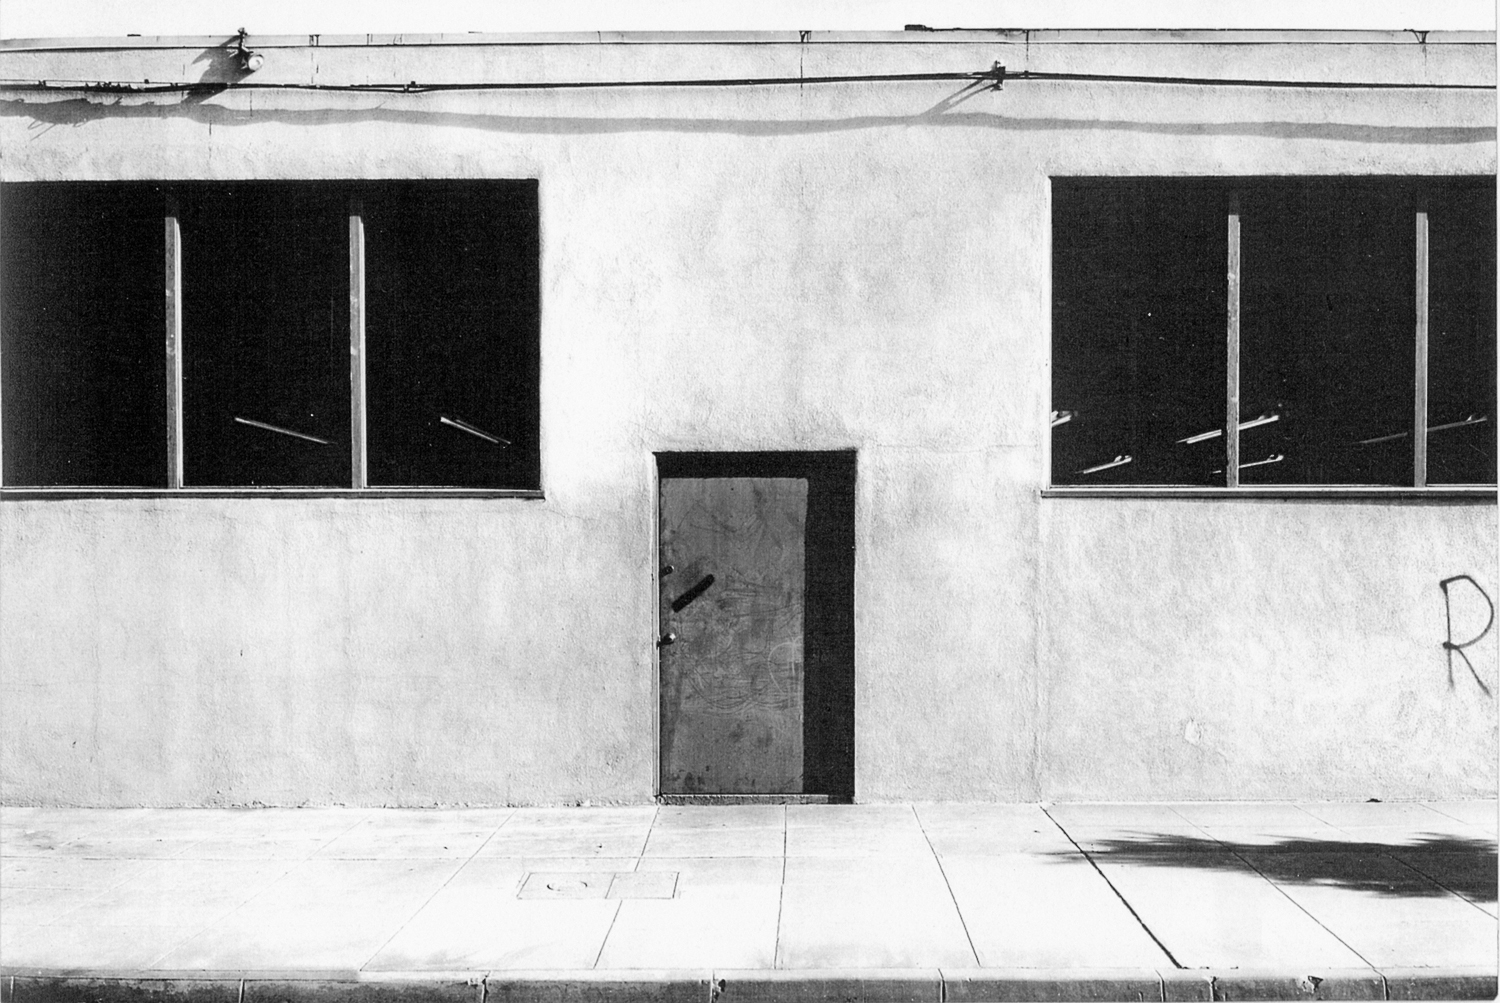 Lewis Baltz, Commercial Building, Pasadena, 1973. © Successors of Lewis Baltz. Used by permission. Courtesy of Gallery Luisotti, Santa Monica